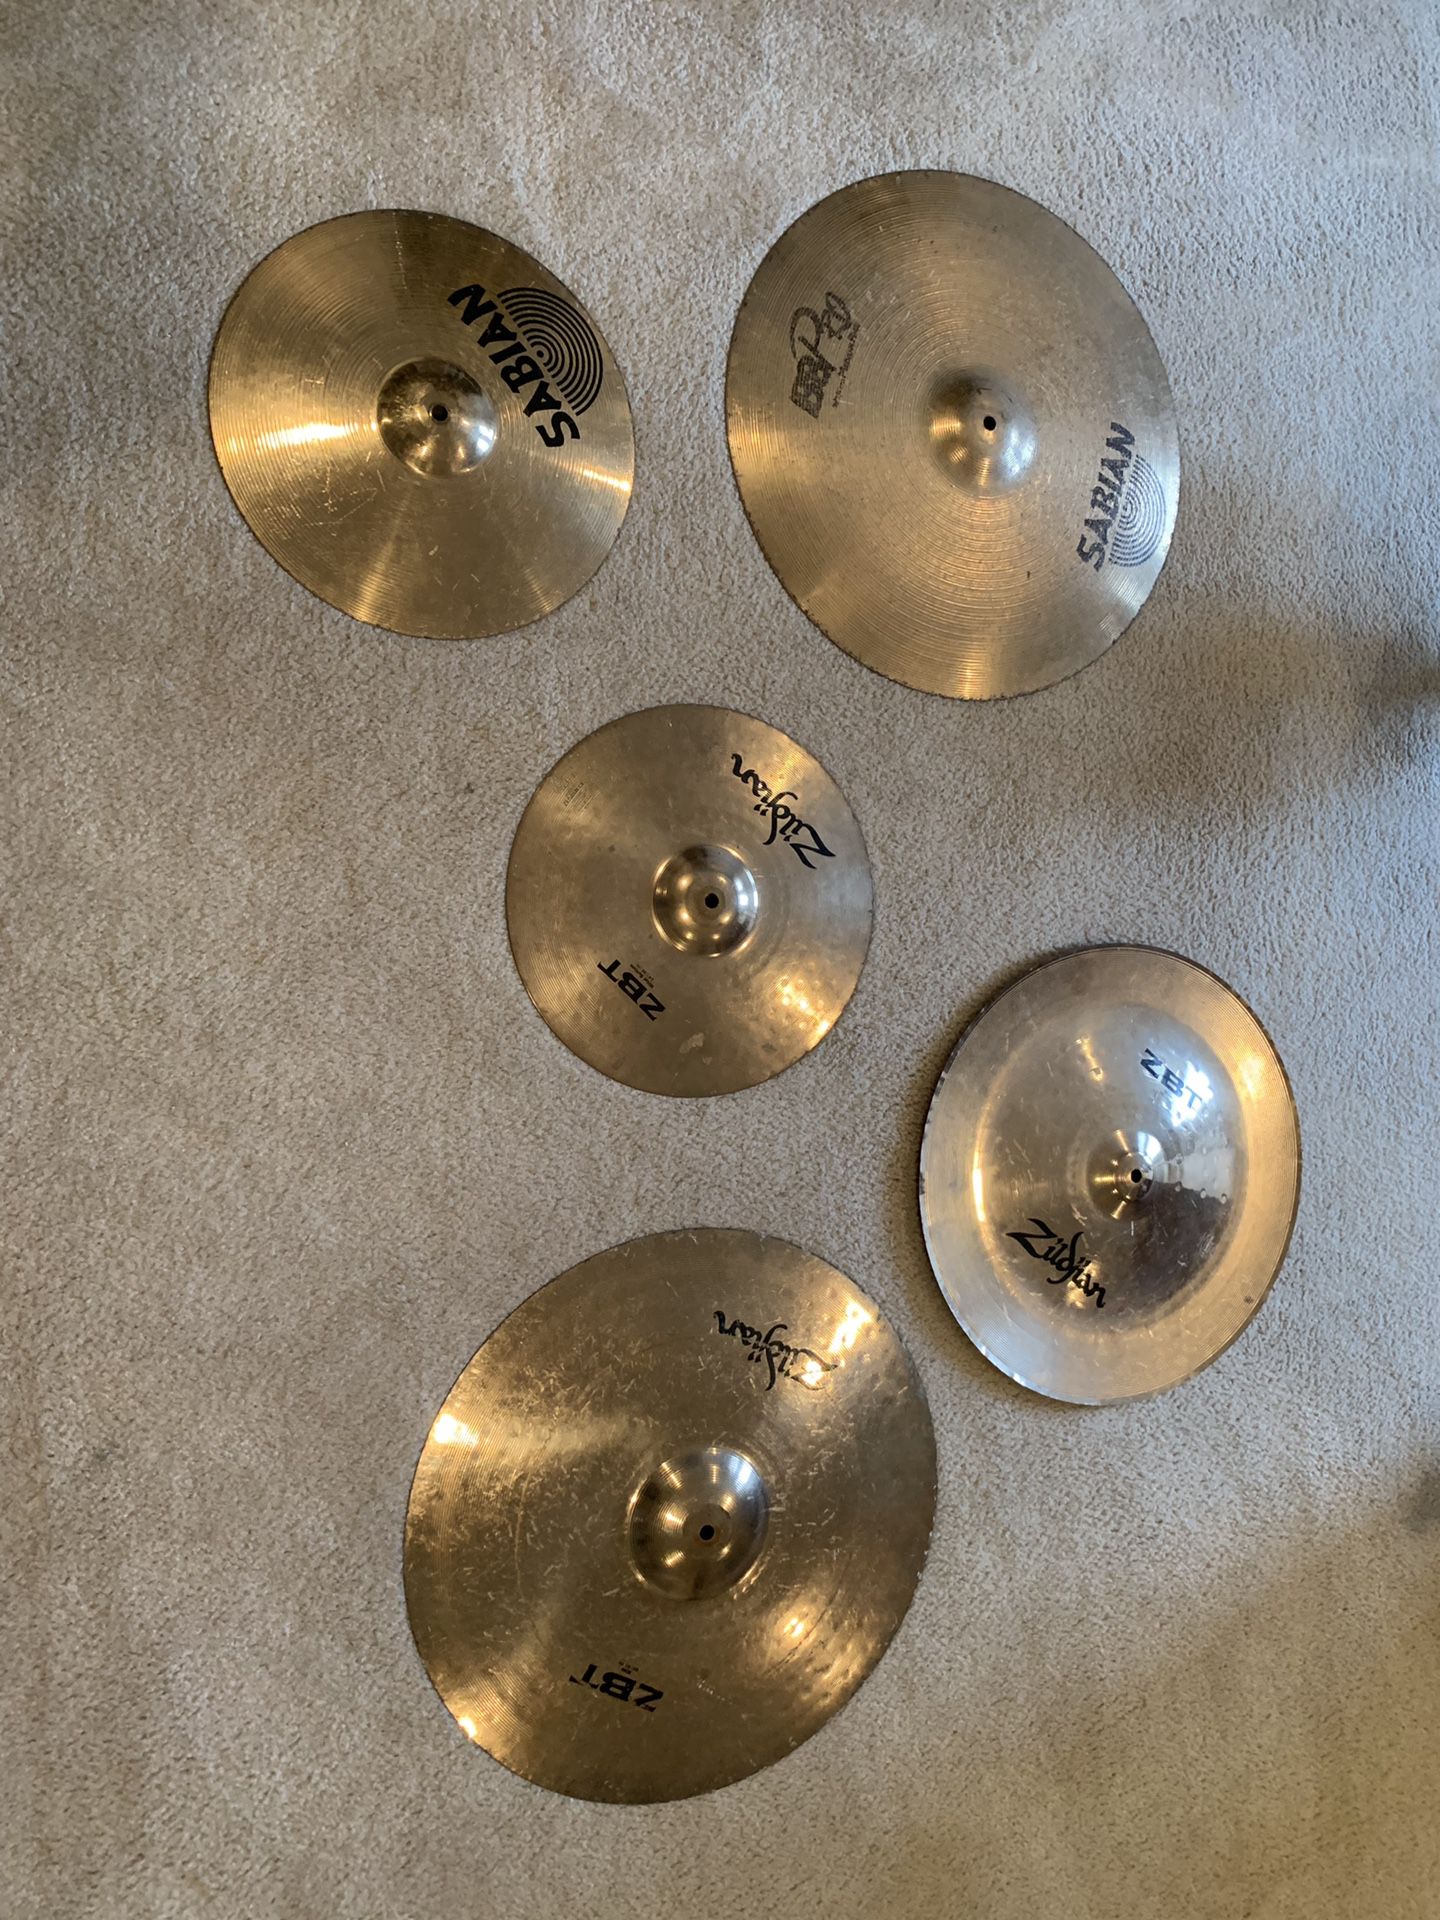 5 cymbals: used zildjian and Sabian. 2 are 20 inch. 1 is 18 inch and 2 are 14 inch.